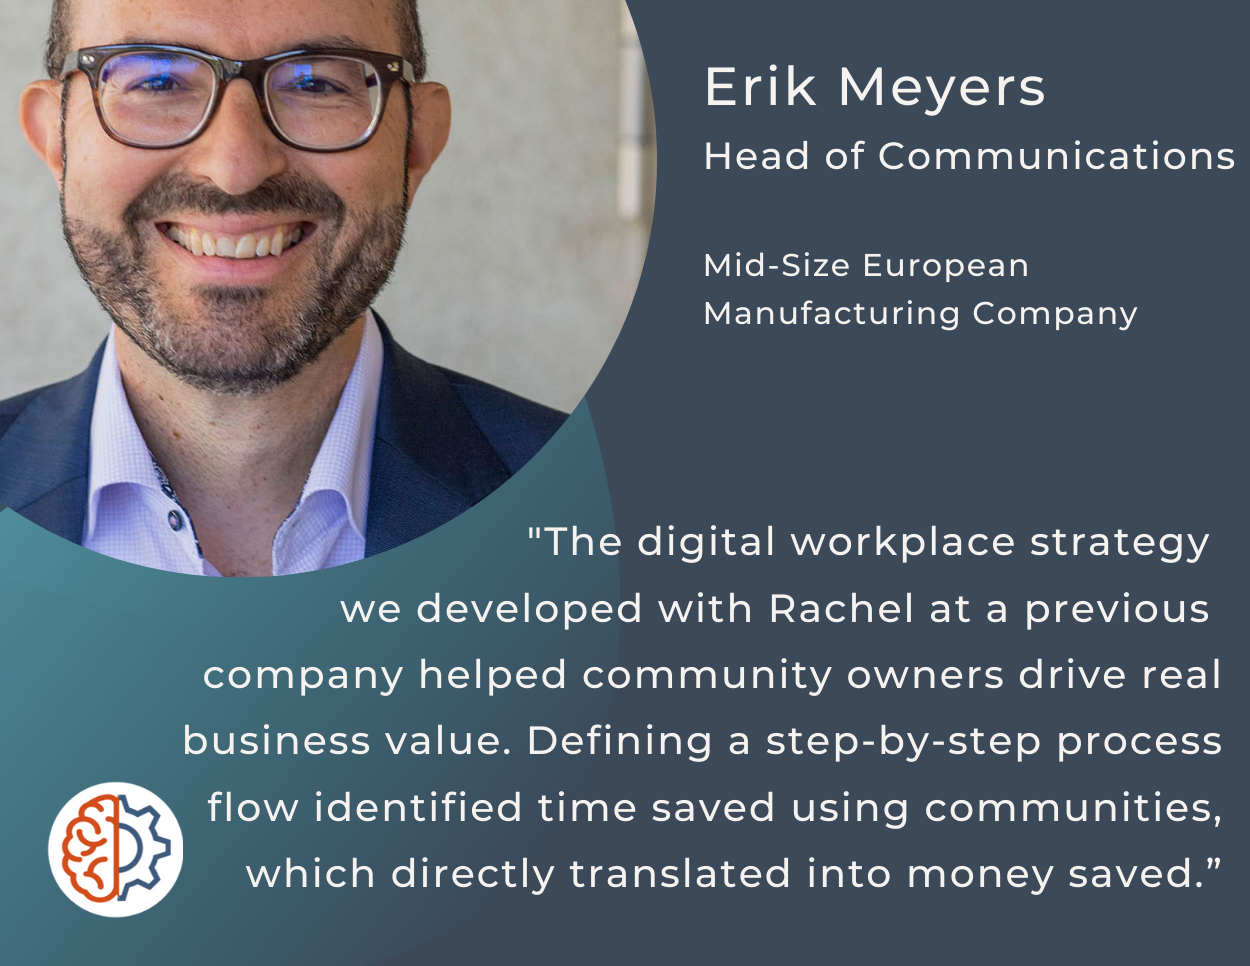 "The digital workplace strategy we developed with Rachel at a previous company helped community owners drive real business value. Defining a step-by-step process flow identified time saved using communities, which directly translated into money saved.”